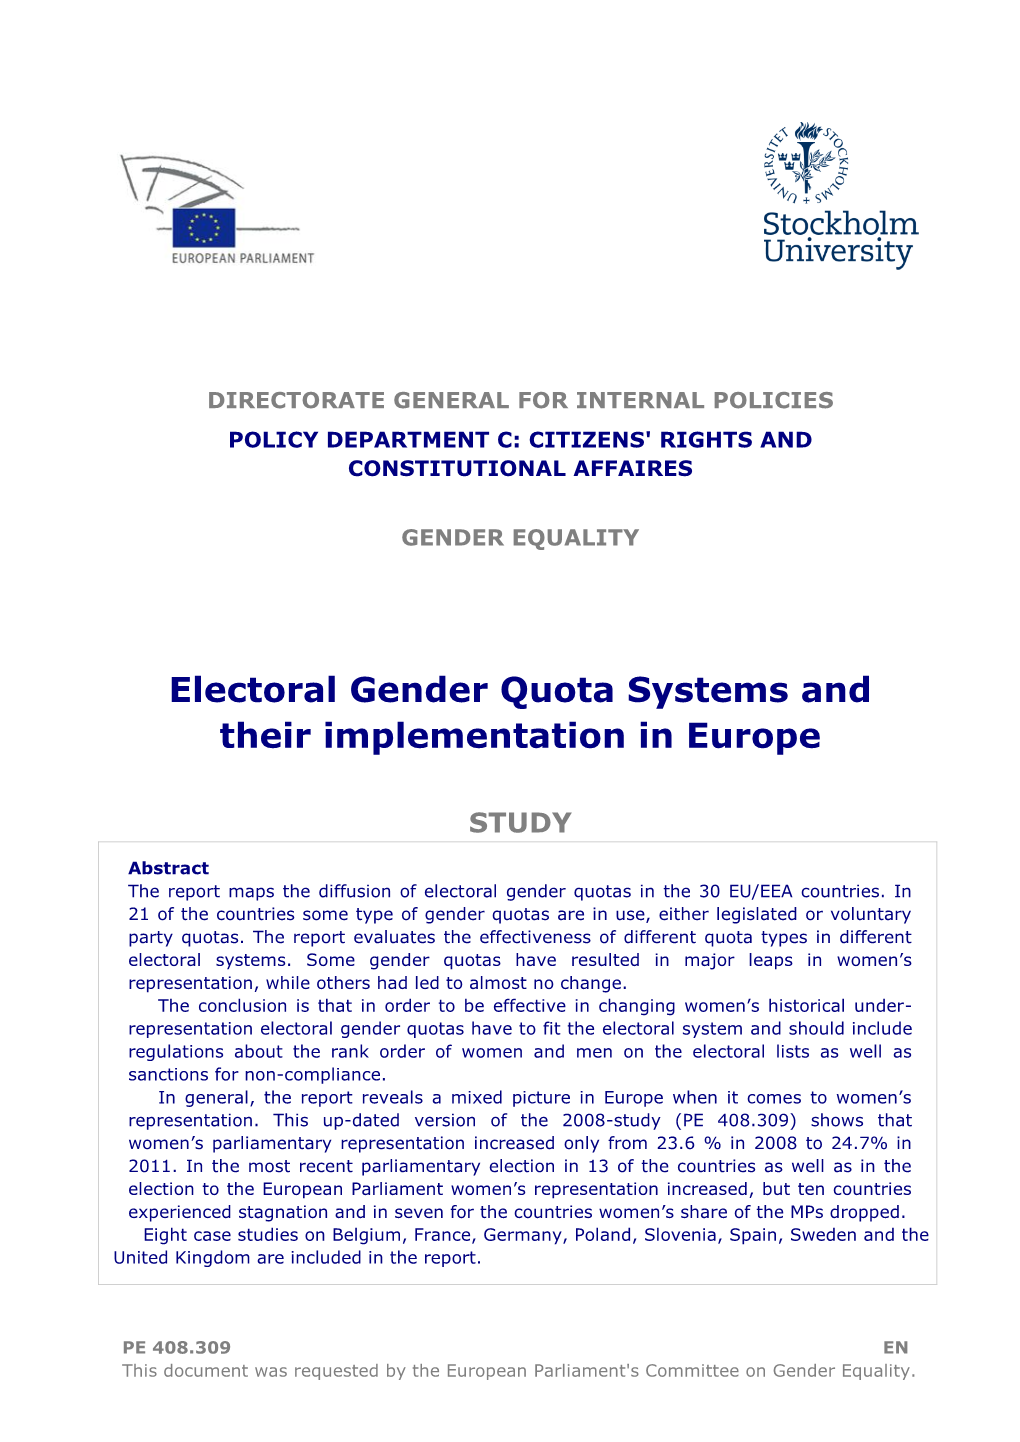 Electoral Gender Quota Systems and Their Implementation in Europe